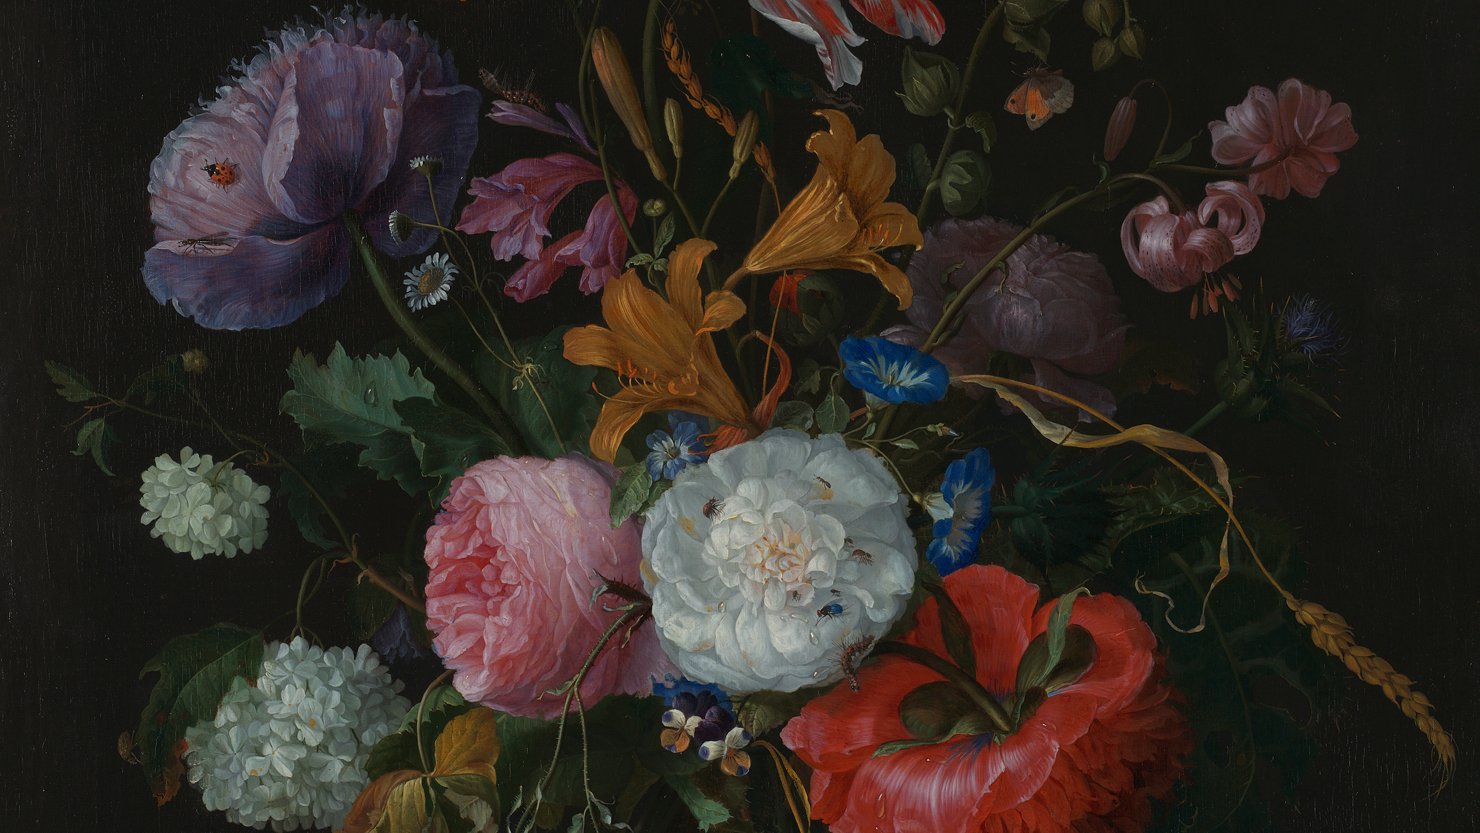 The National Gallery's 'Dutch Flowers' and Yinka Shonibare CBE RA's 'End of Empire' to open at The Box in October | The Box Plymouth